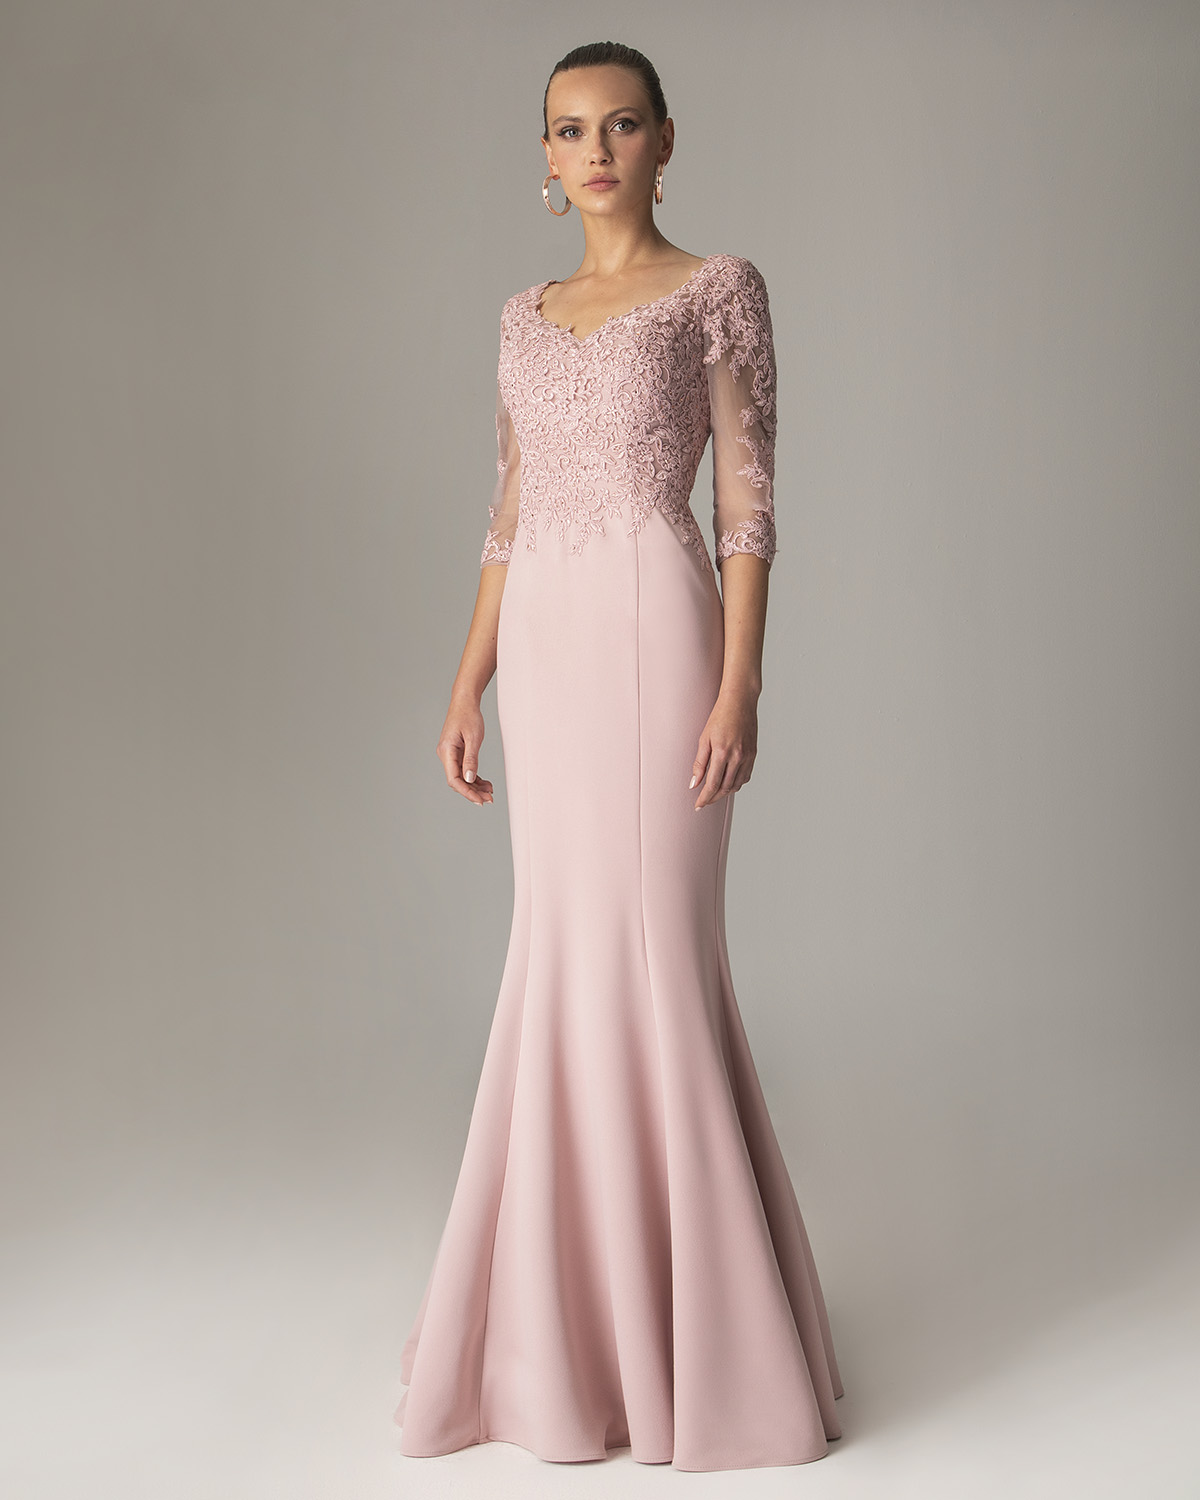 Классические платья / Long crepe dress with applique lace top and long sleeves